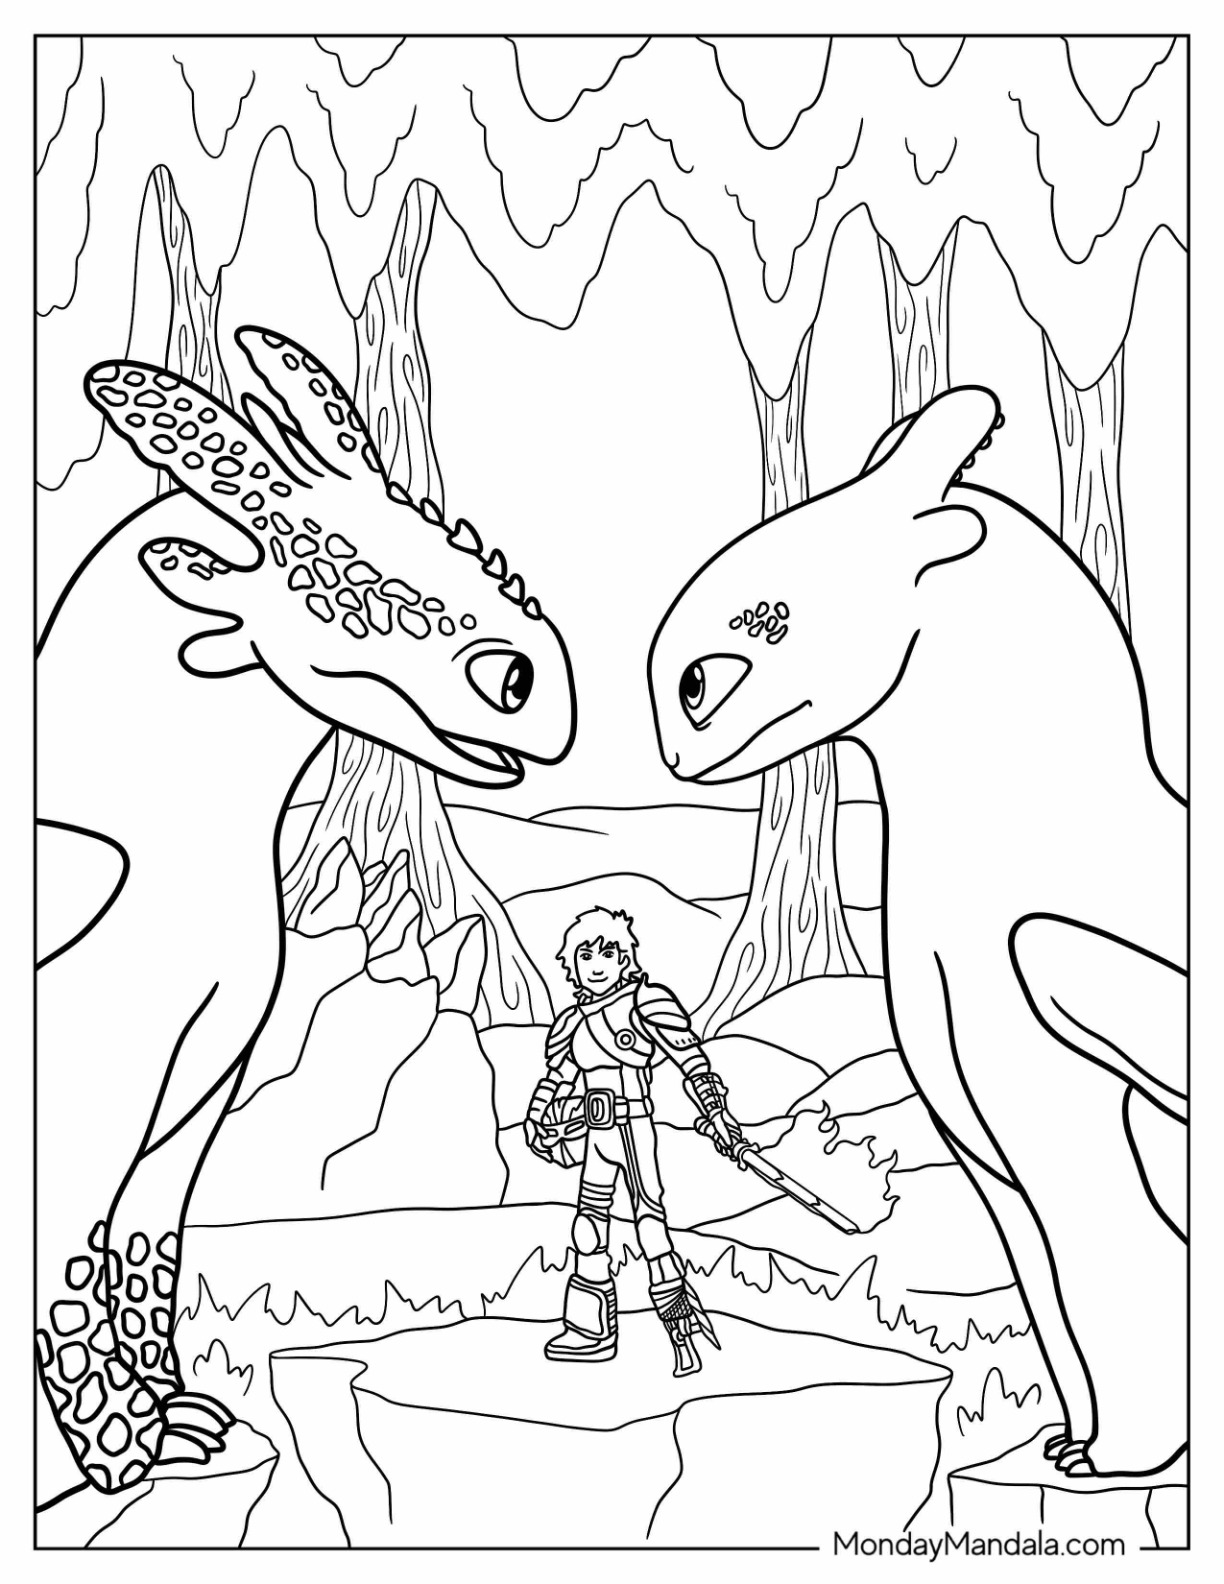 How to train your dragon coloring pages free pdfs